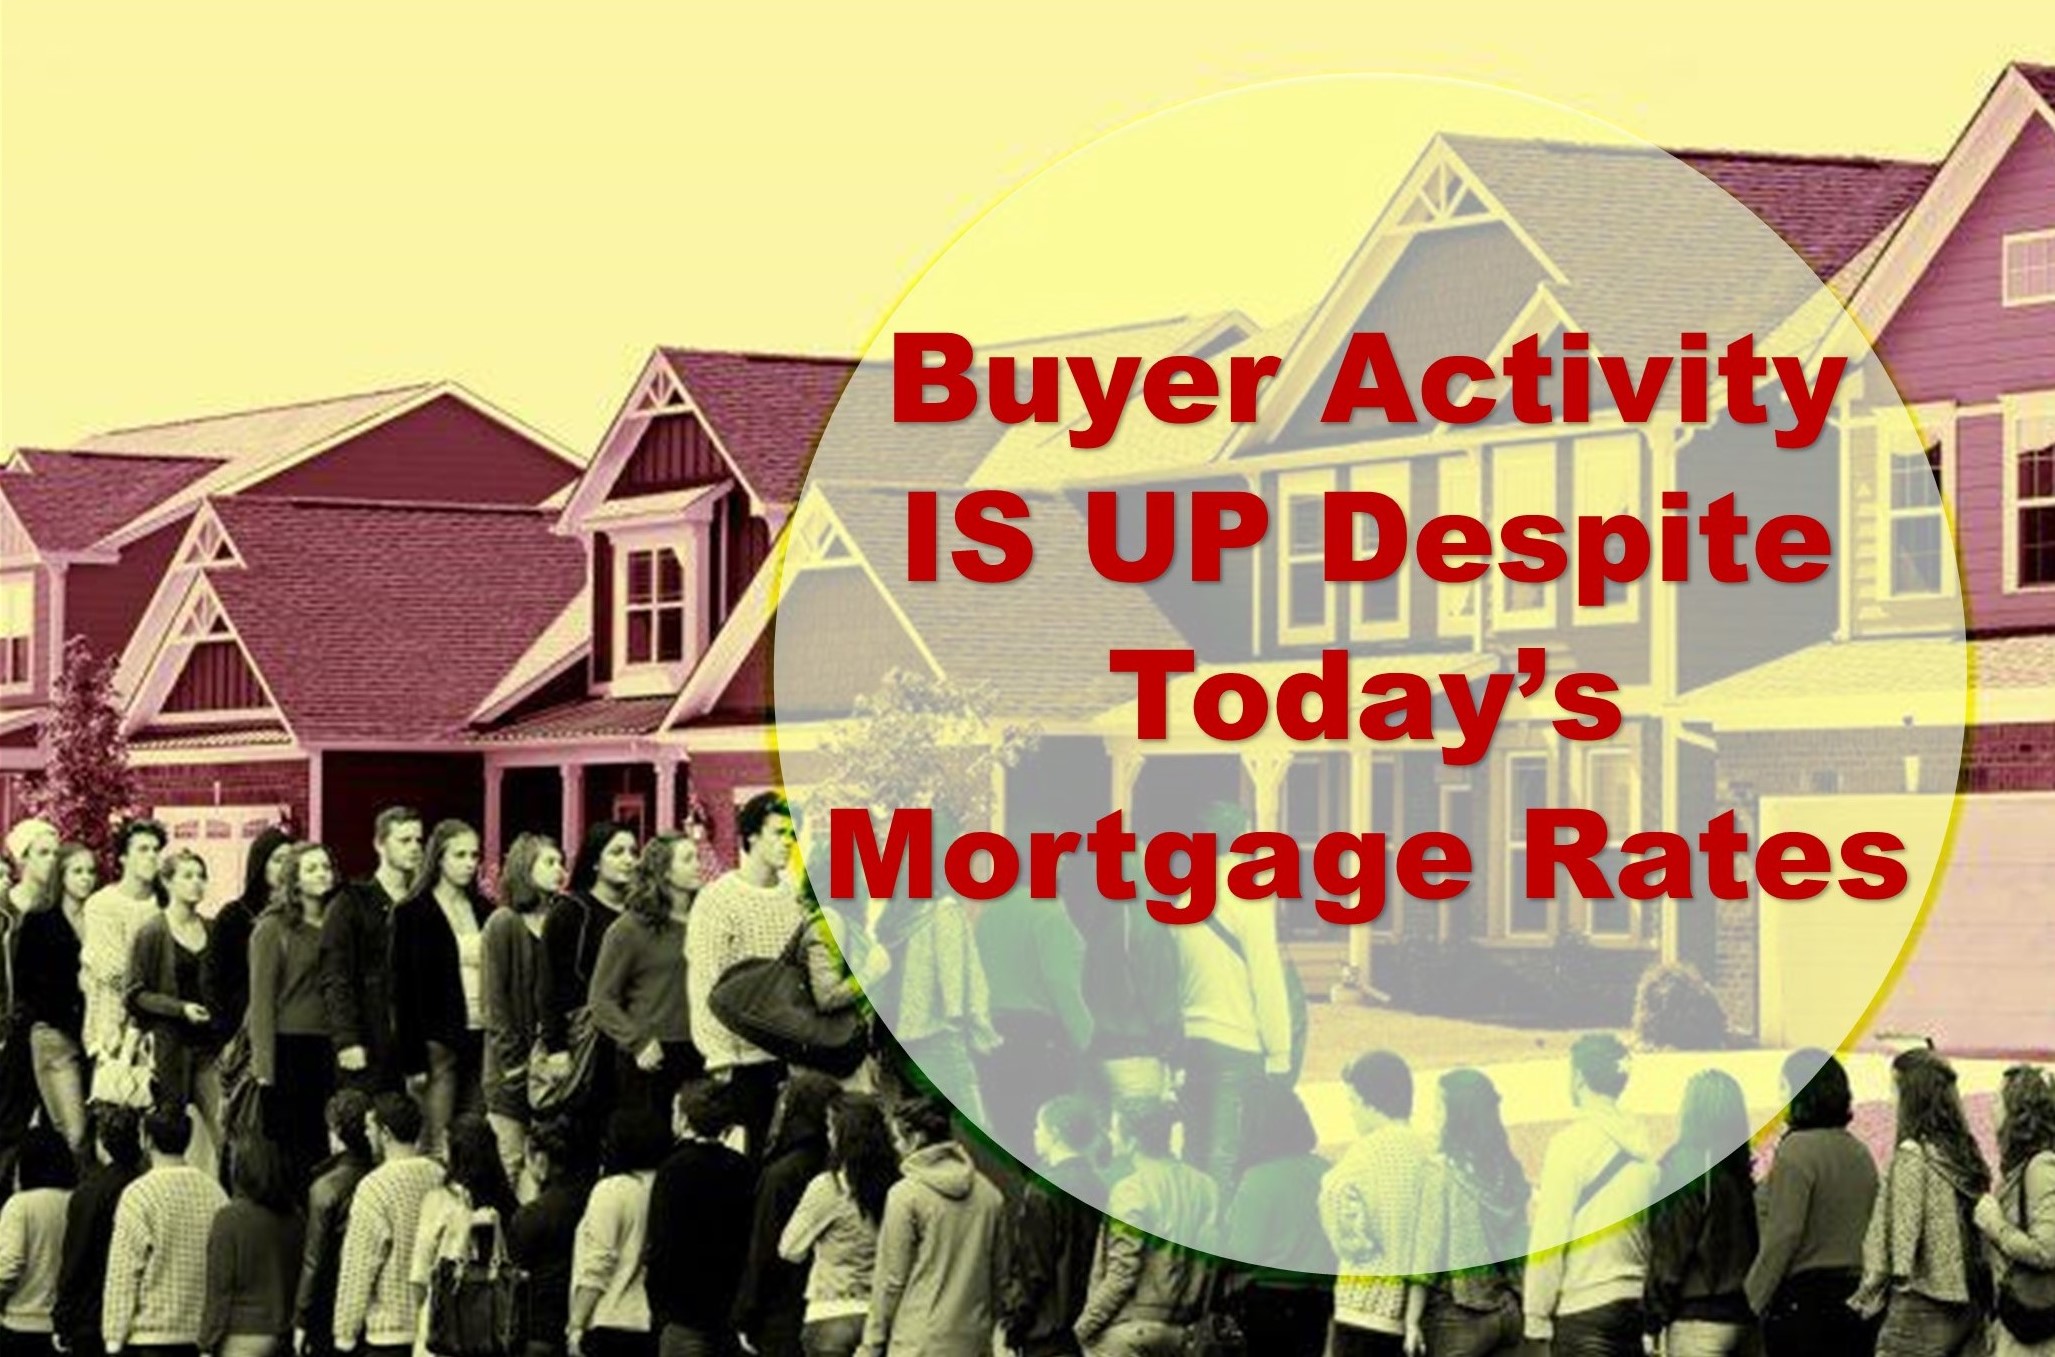 Buyer Activity Is Up Despite Today's Mortgage Rates